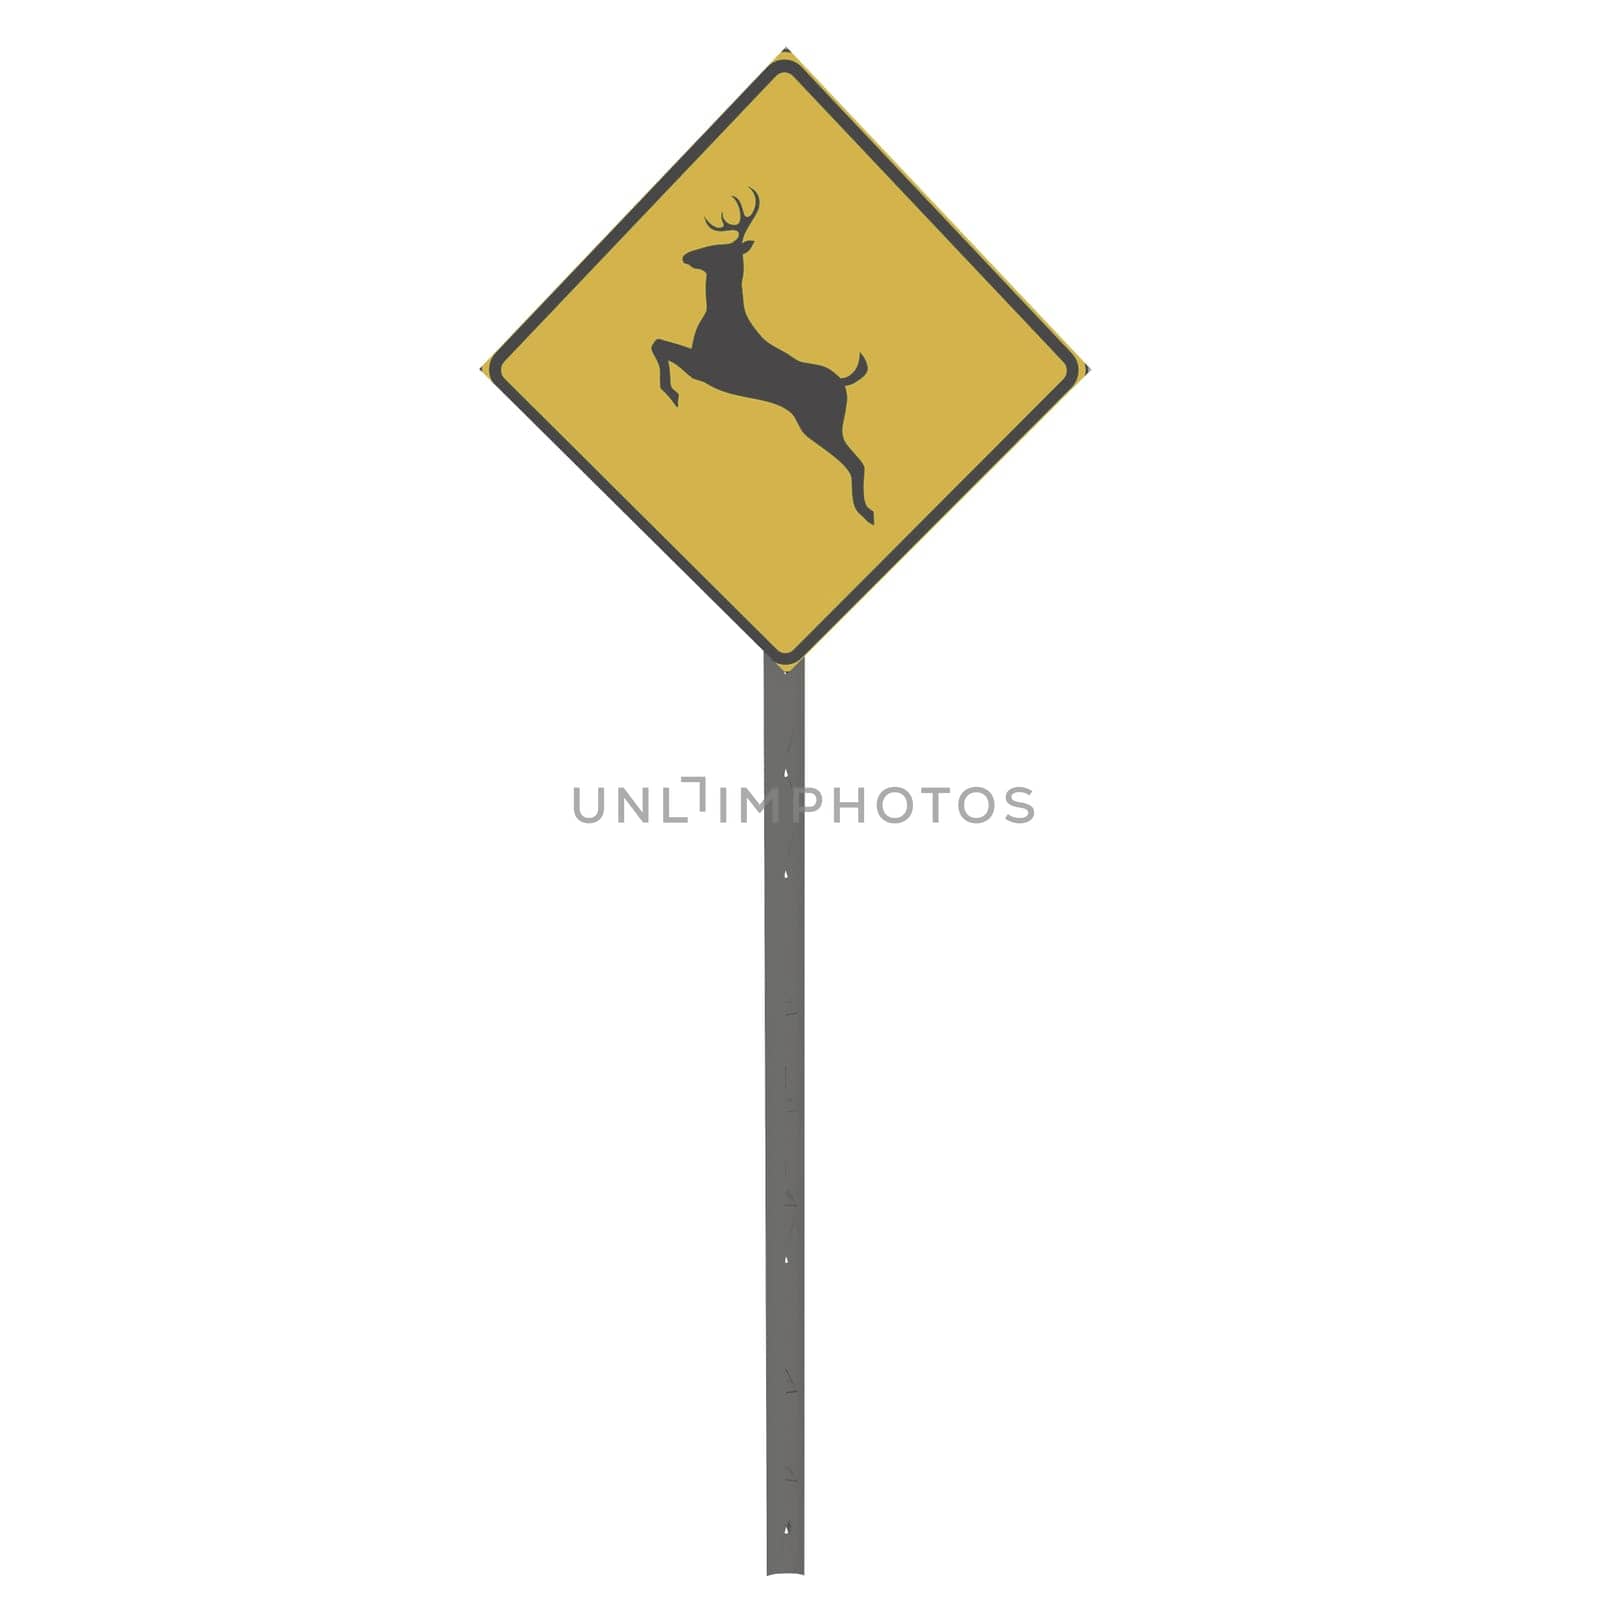 Deer Traffic Sign isolated on white background by gadreel